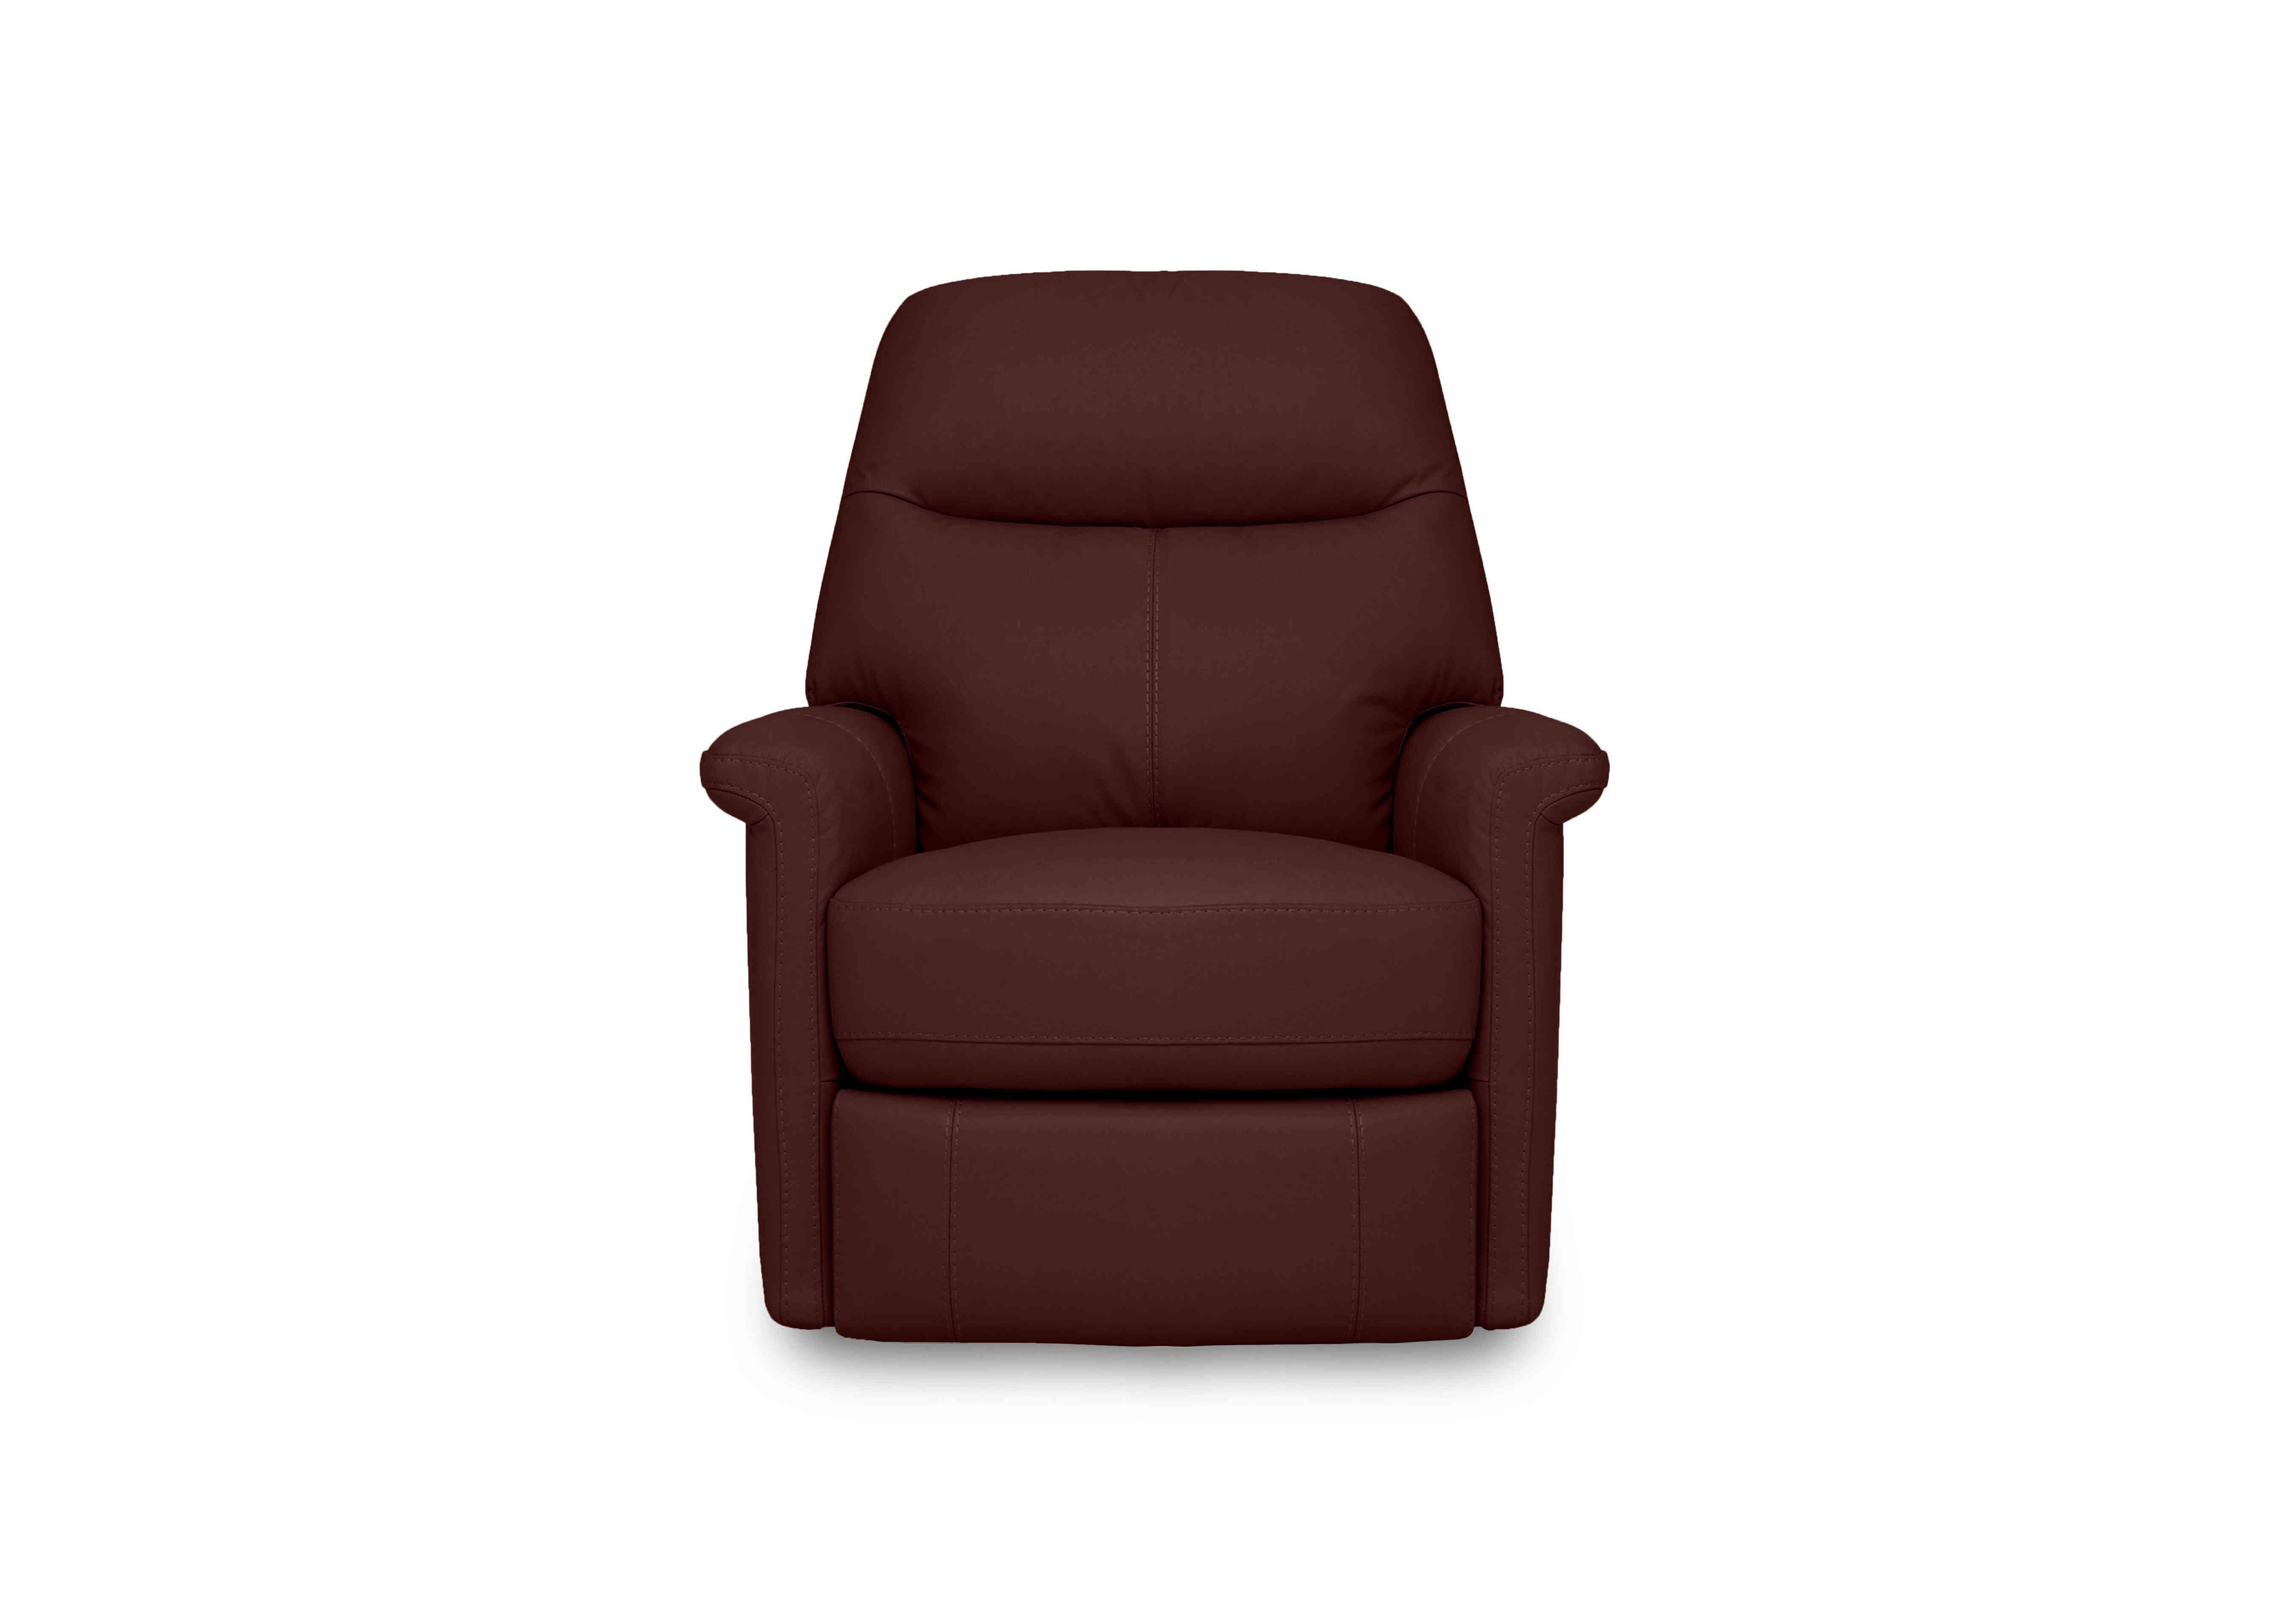 Compact Collection Lille Leather Rocker Swivel Chair with Power Recliner in Bv-035c Deep Red on Furniture Village